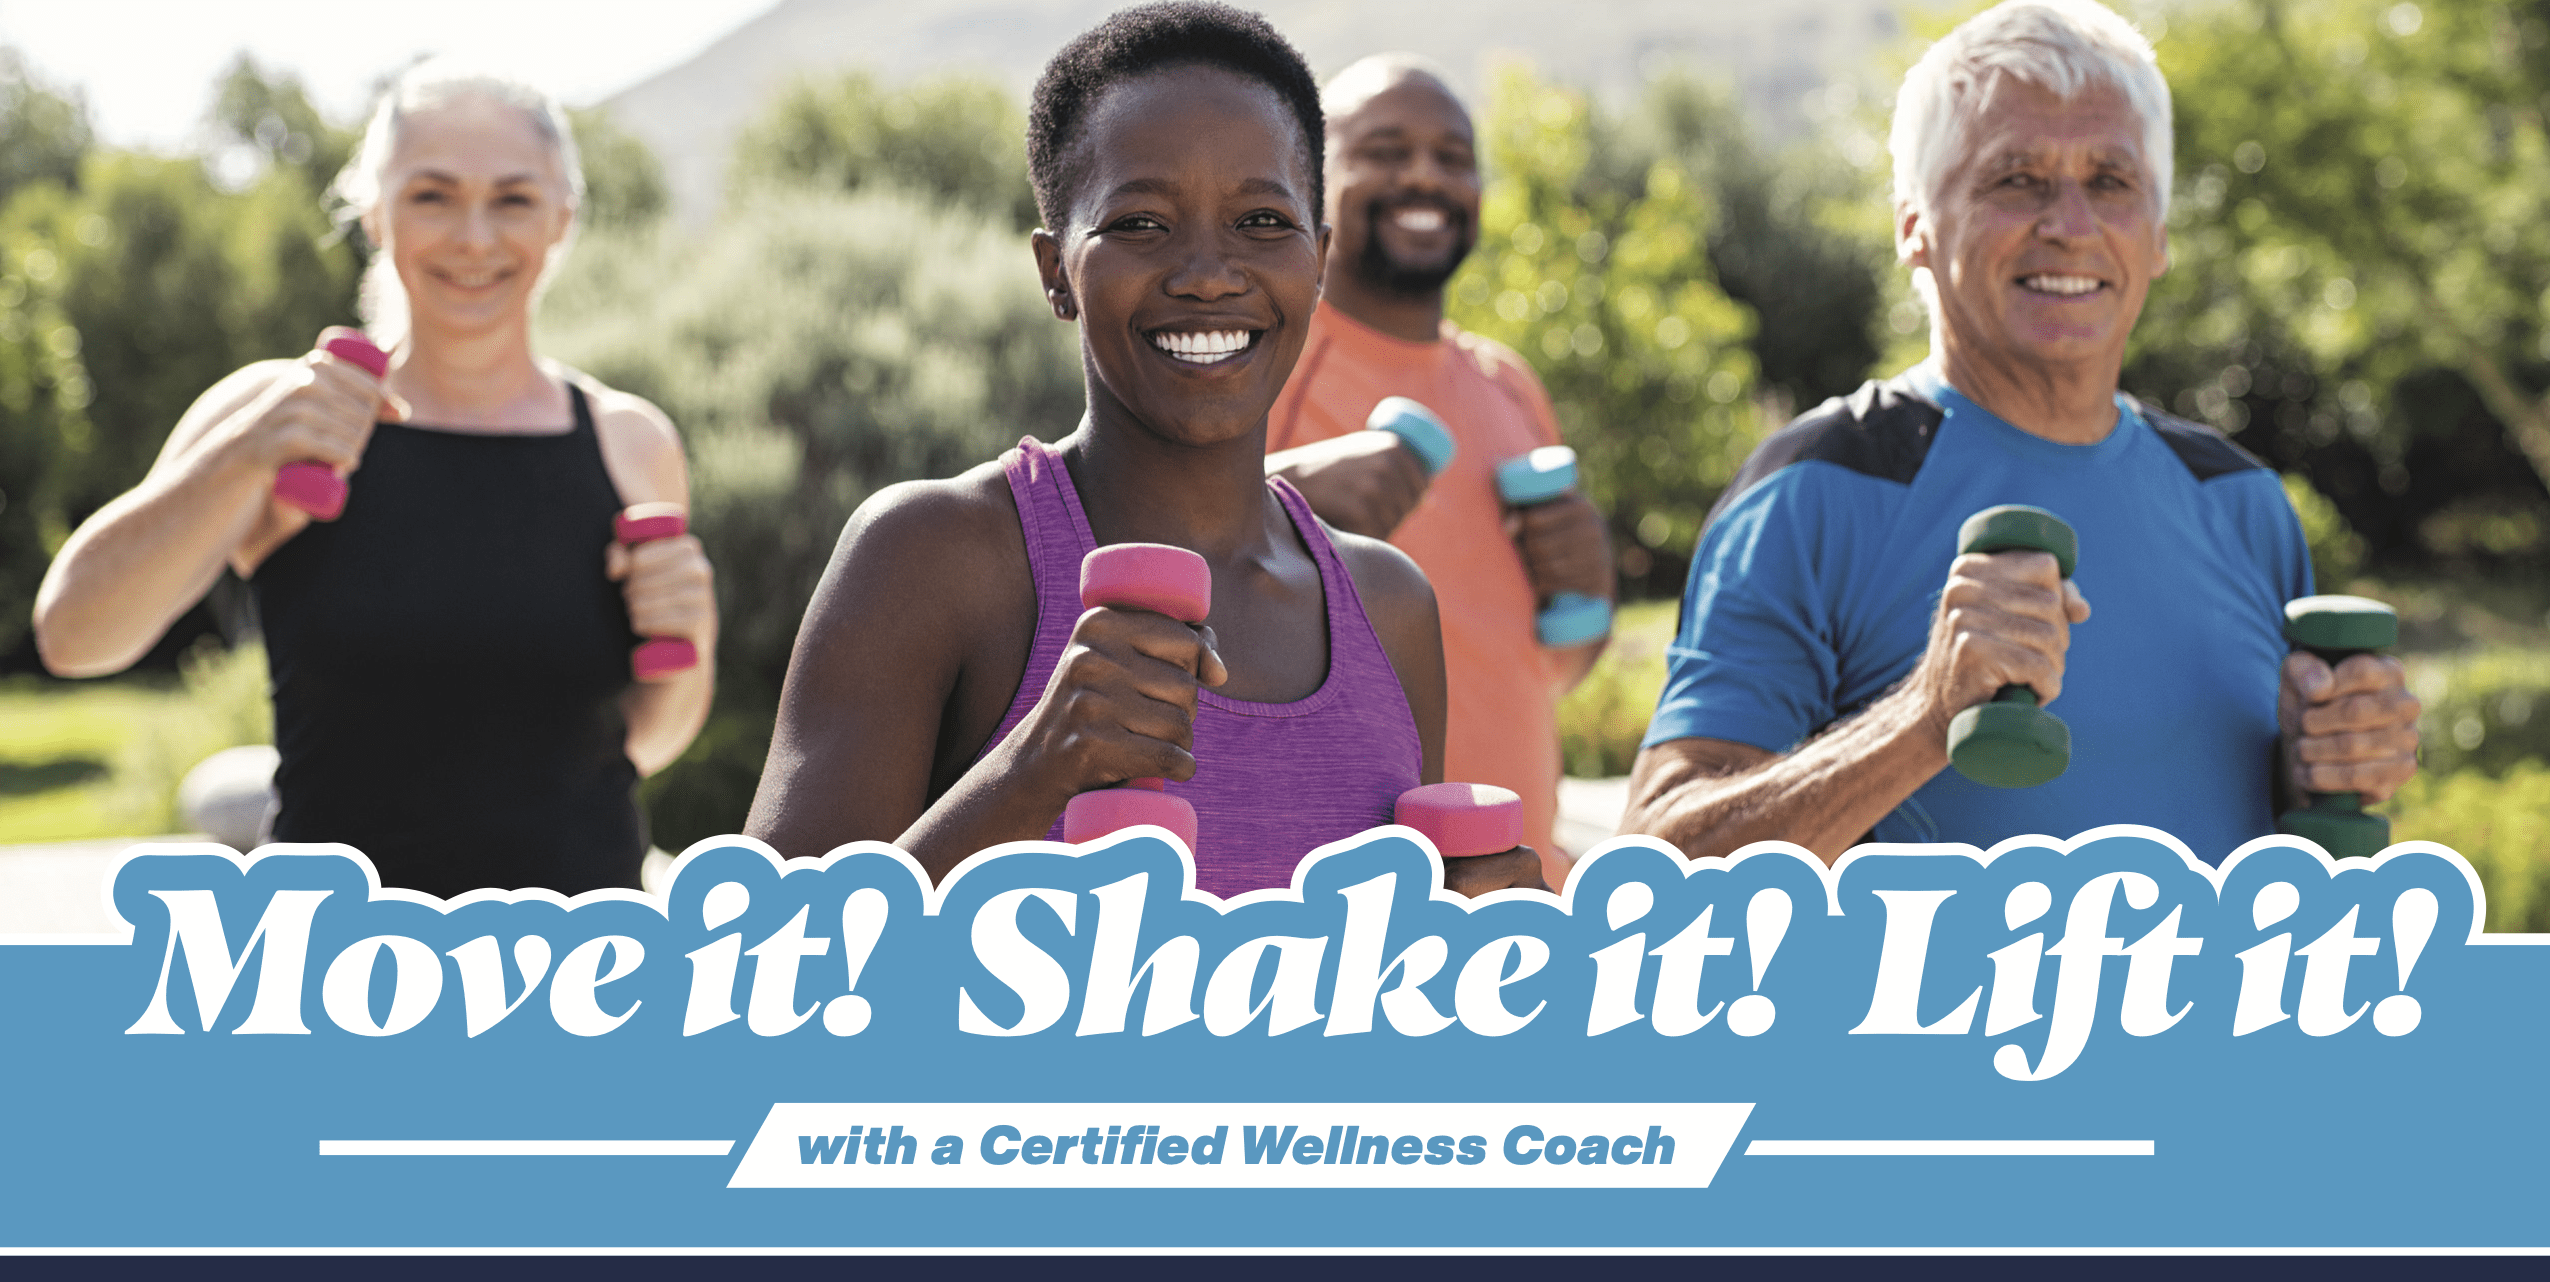 Four happy individuals smiling and working out together with hand weights. Move it! Shake it! Lift it! with a Certiﬁed Wellness Coach